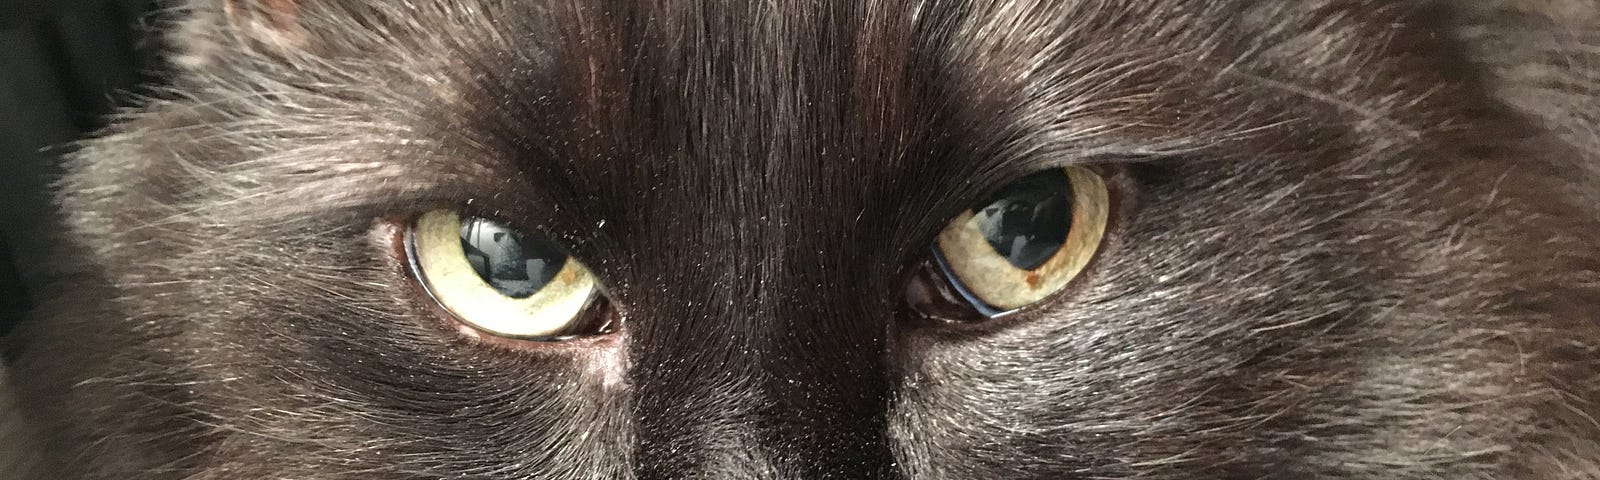 Close up of black cat’s face